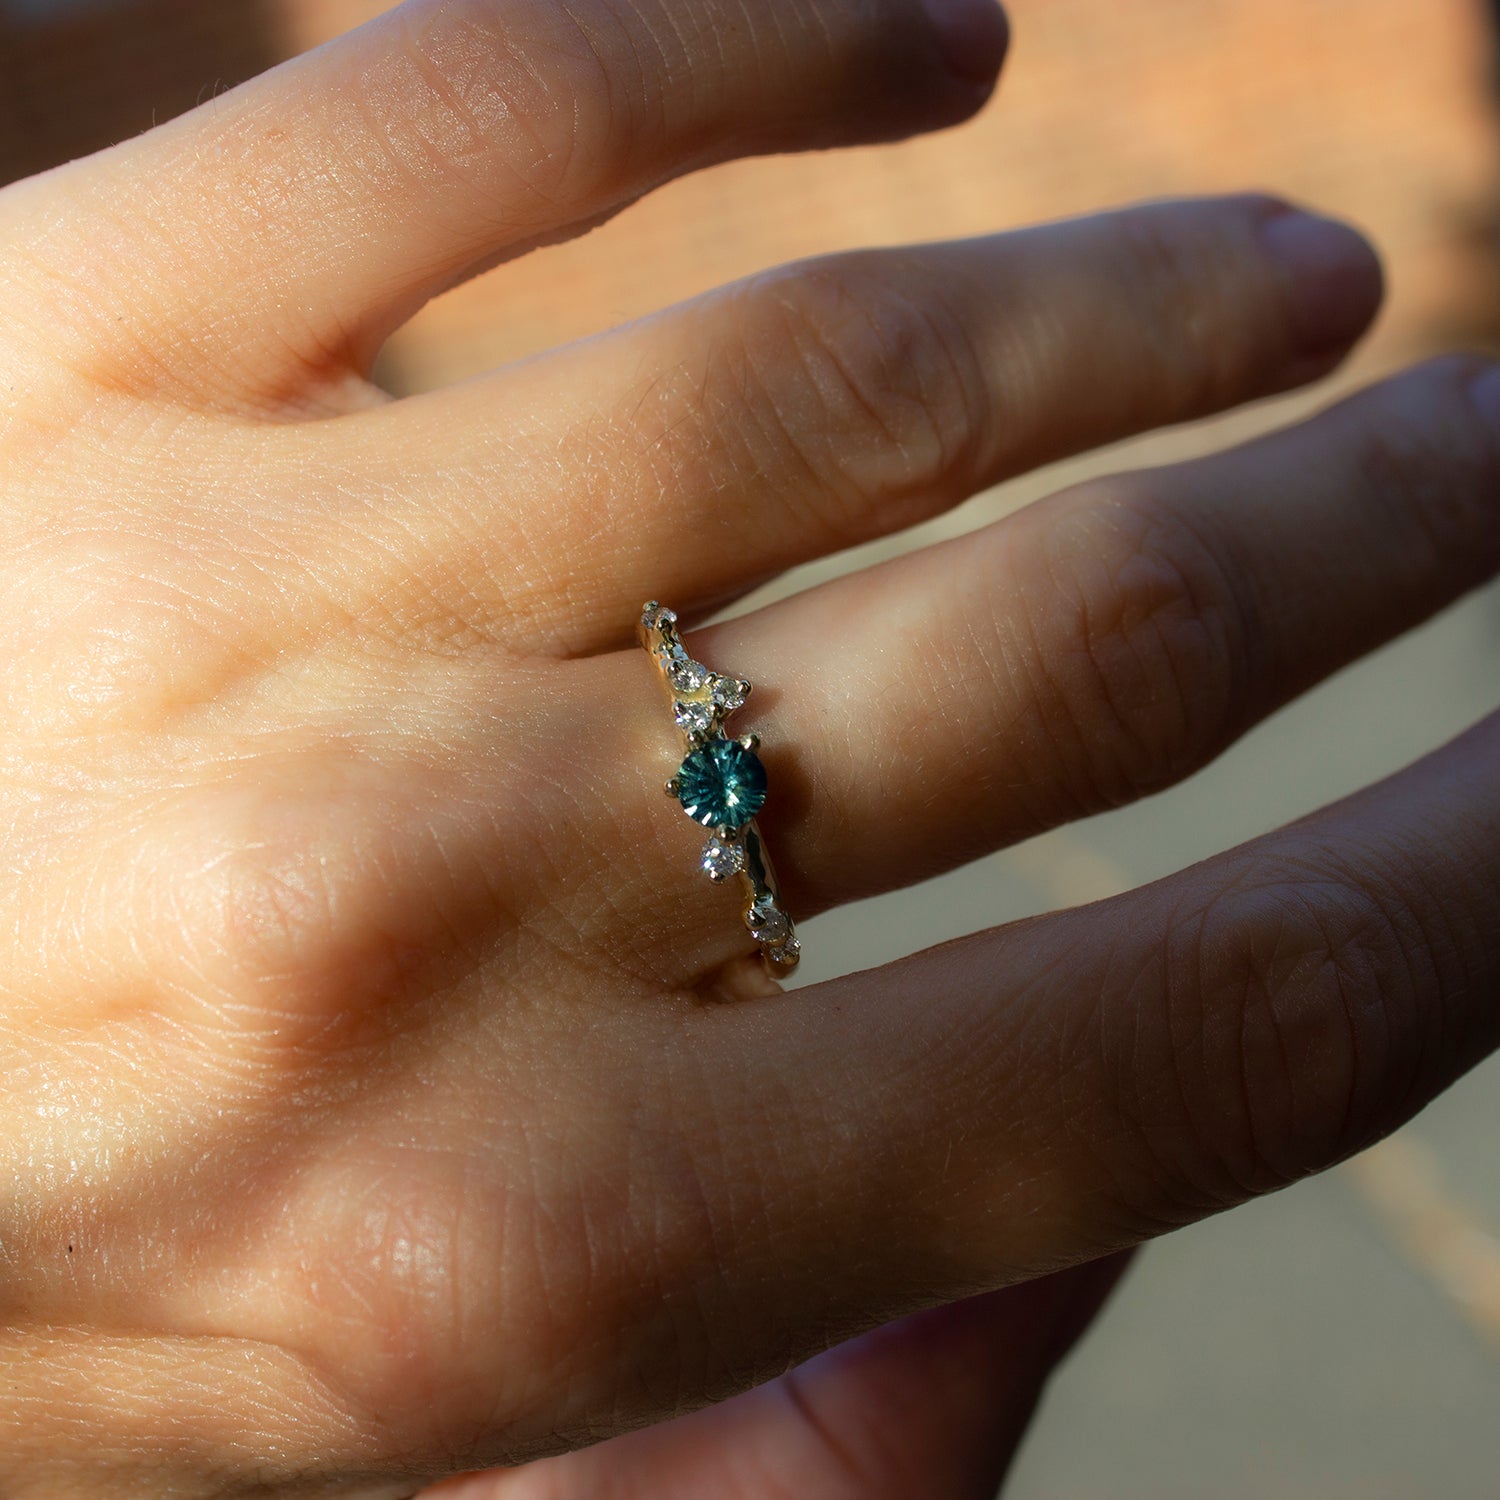 Asymmetrical, delicate ring featuring a beautiful teal sapphire and white diamonds scattered along a gold band.